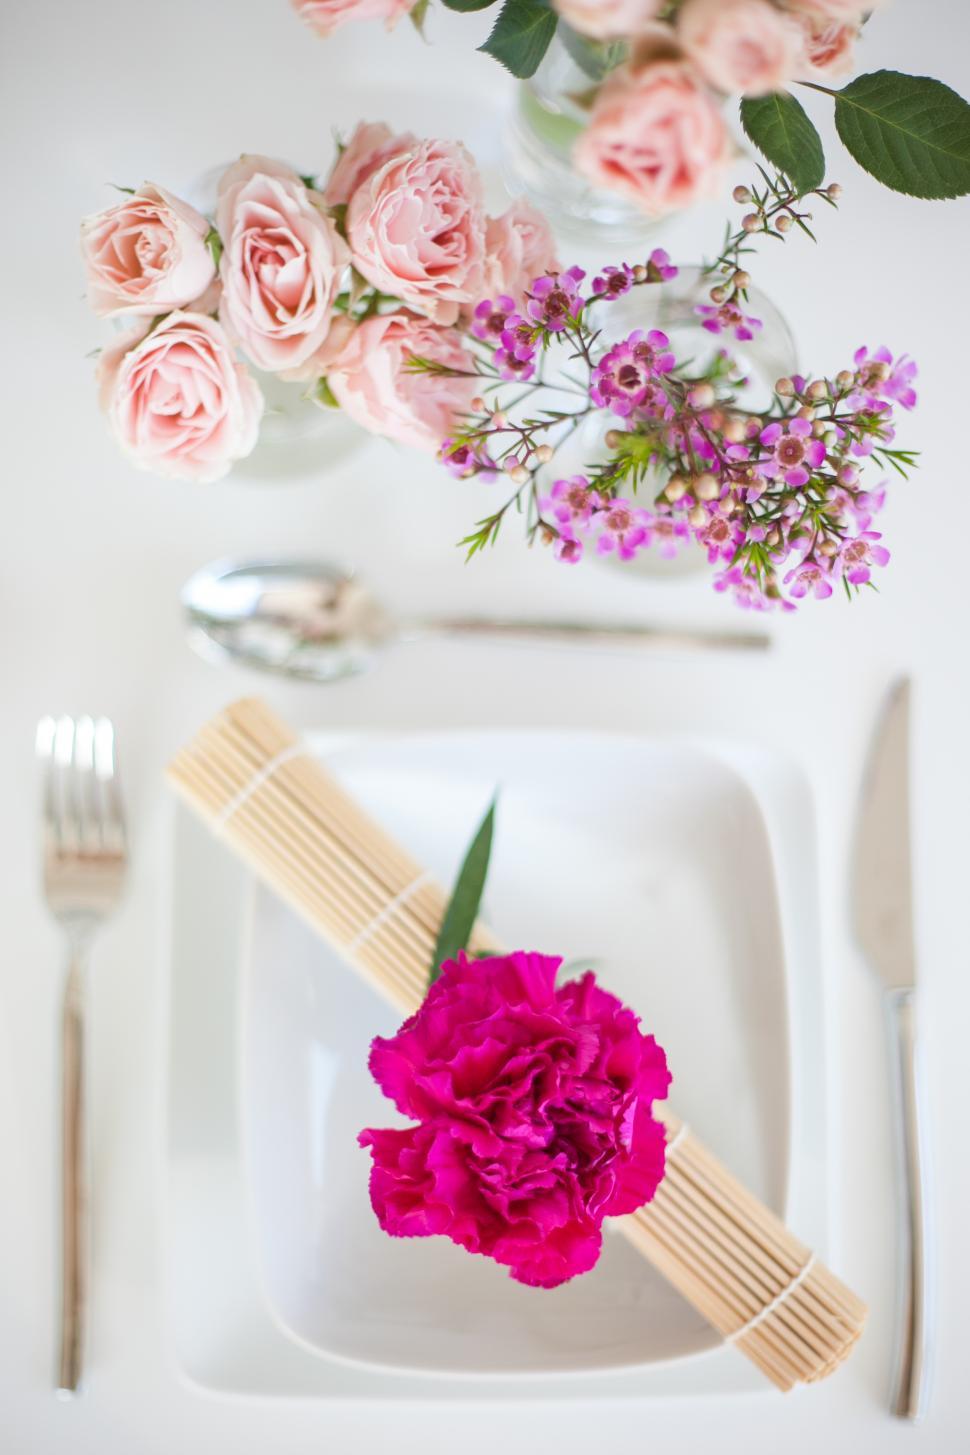 Free Image of Table setting with flowers and cutlery 